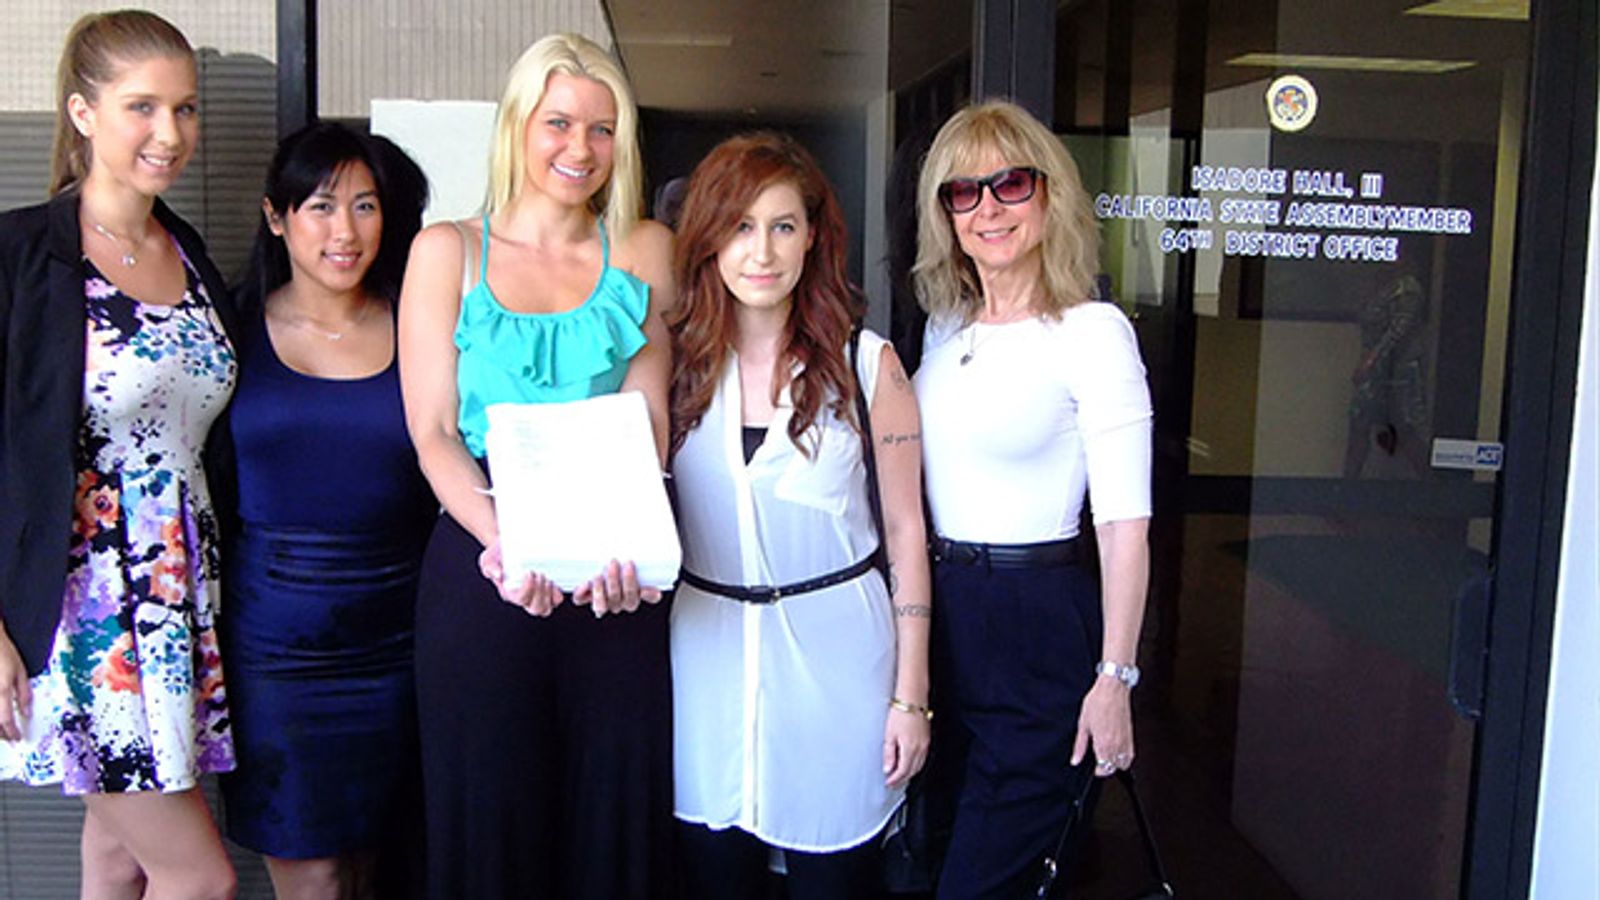 Adult Actresses Deliver Petitions to Isadore Hall Office-UPDATED